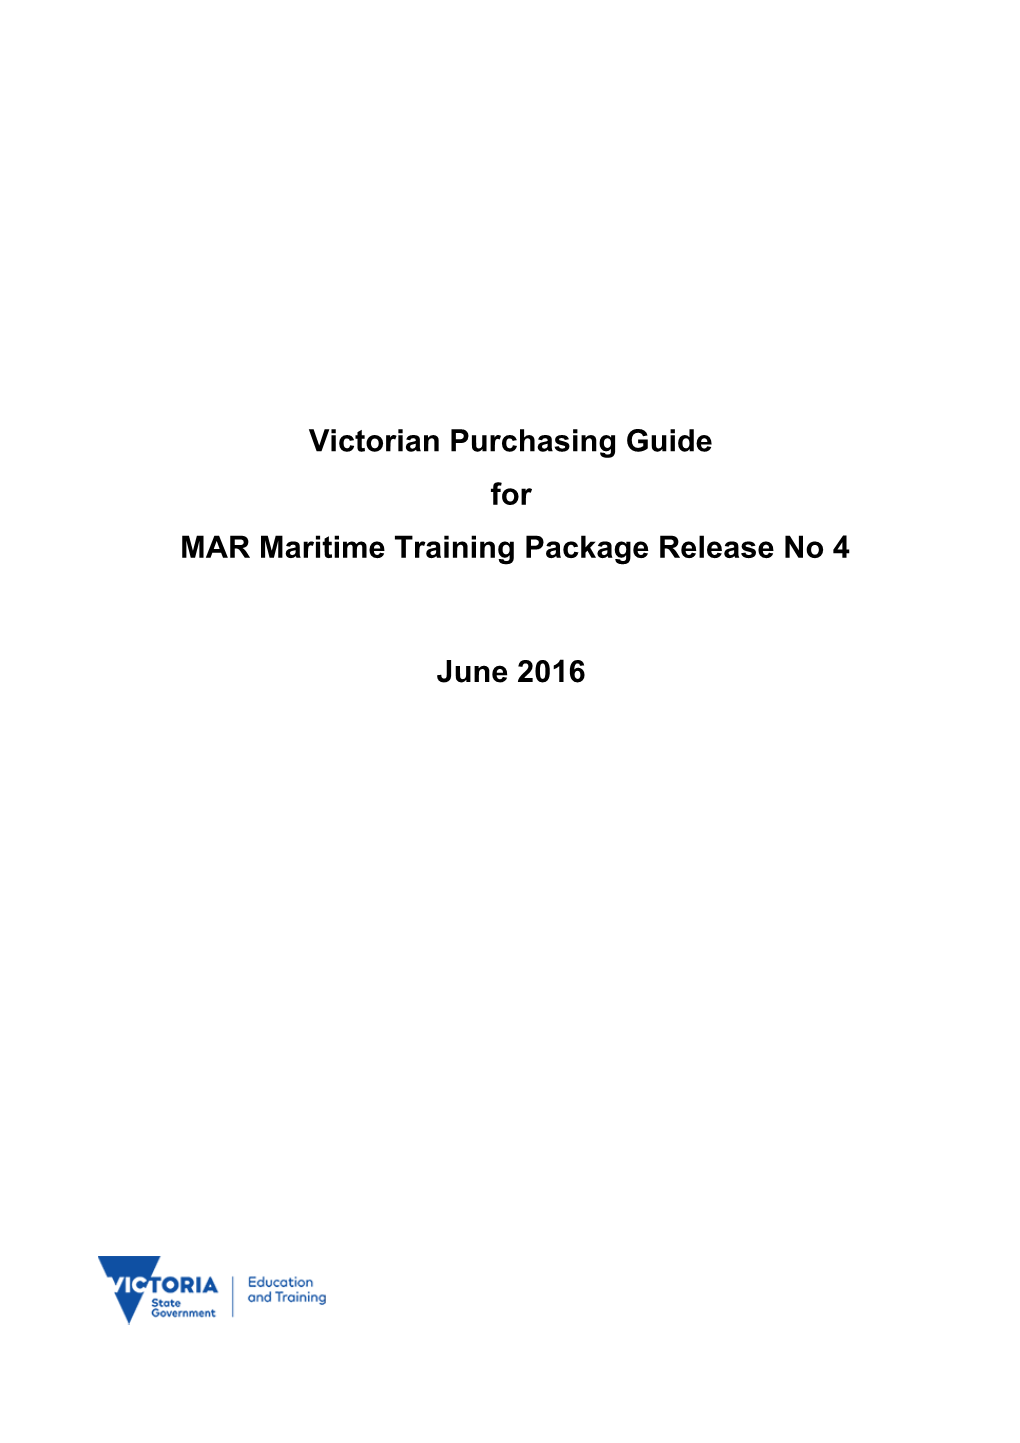 Victorian Purchasing Guide for MAR Maritime